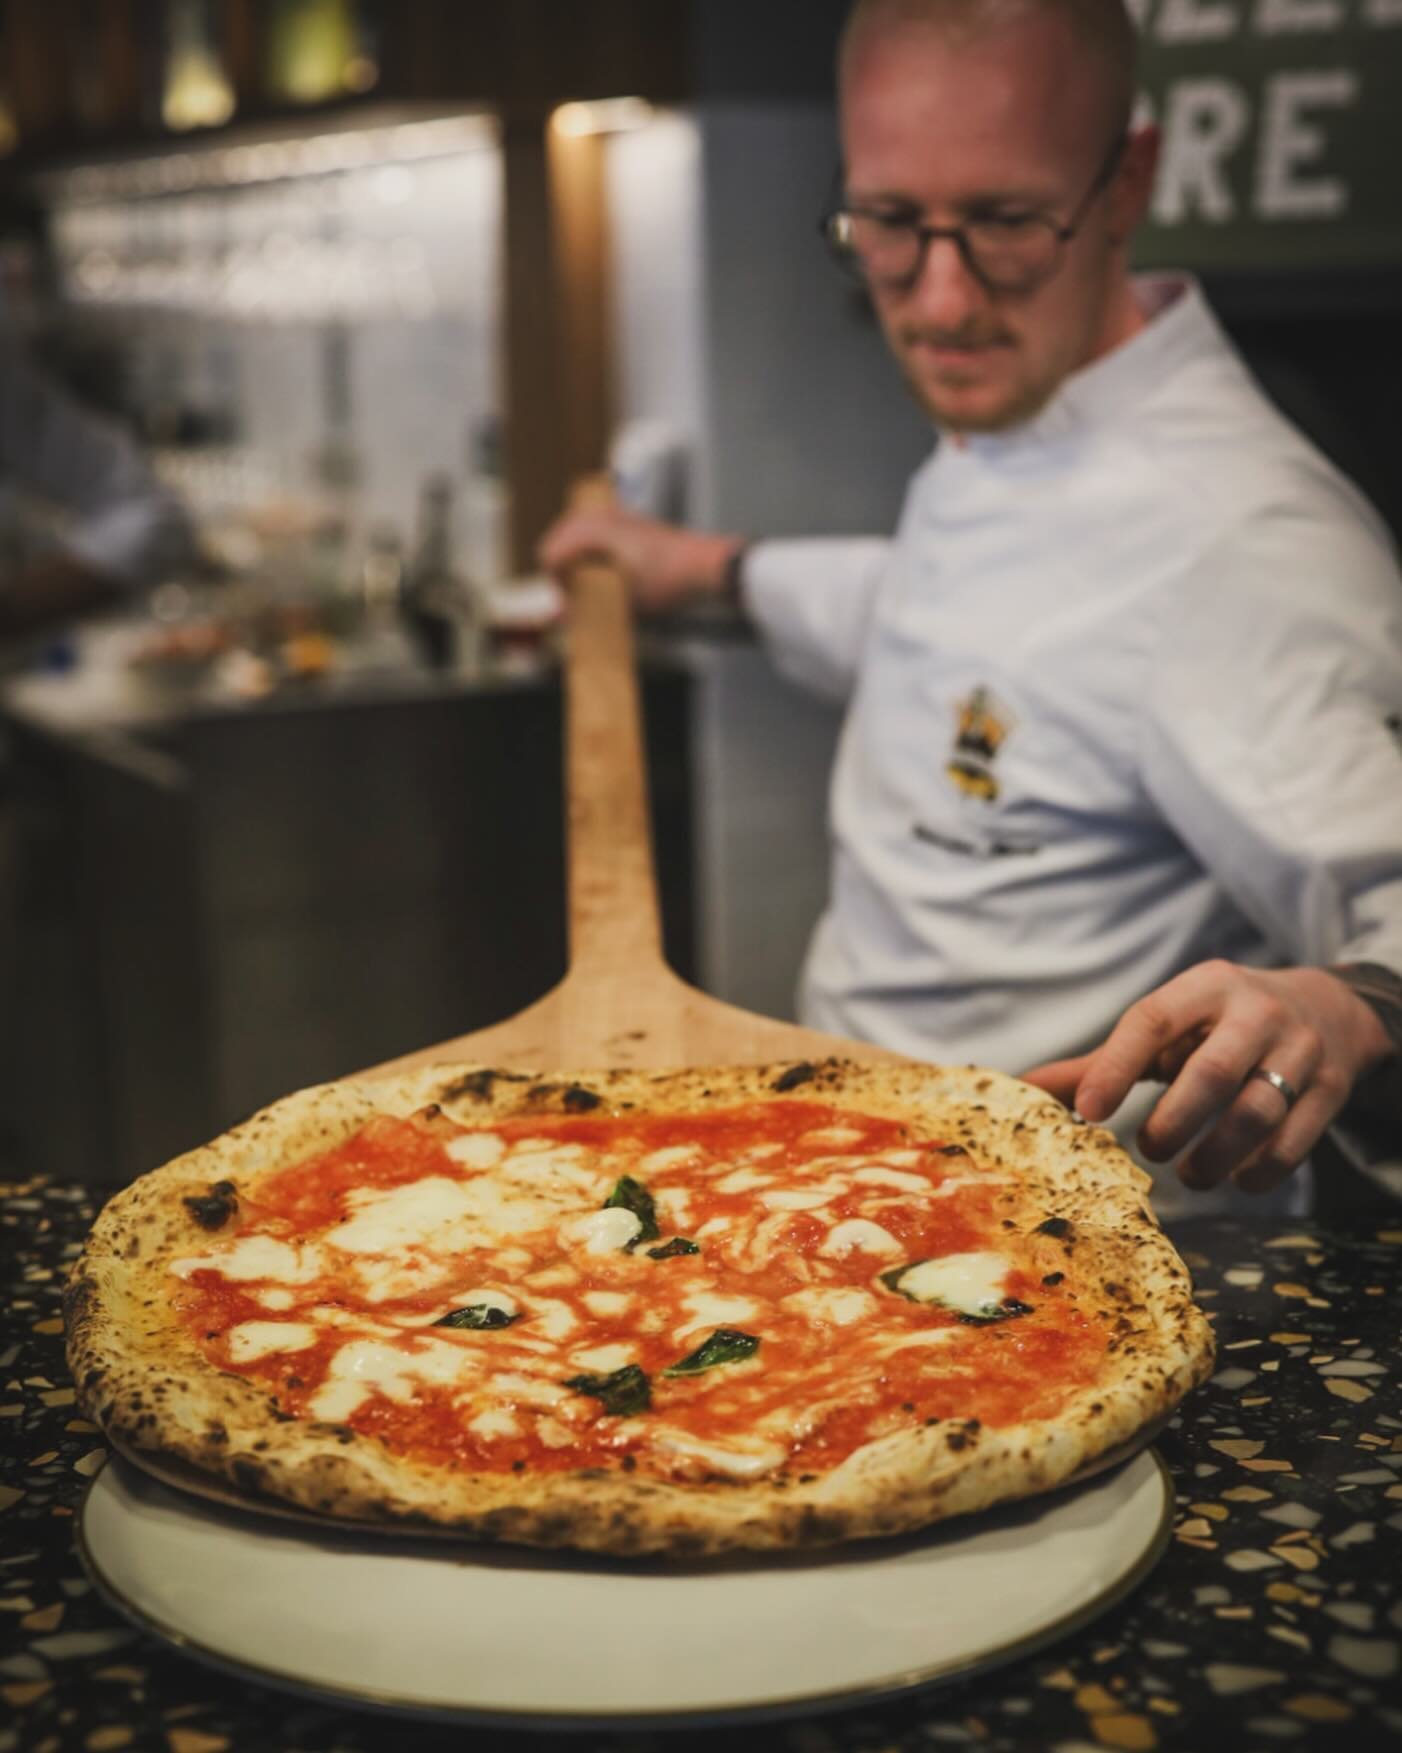 Pizza A Ruota di Carro?
 

🍕 Step back in time with a slice of history at L&rsquo;Antica Pizzeria Da Michele Singapore! 🇸🇬

Our special Pizza A Ruota di Carro, an extra-wide pizza that takes you on a delicious journey to the late 1800s. Named afte